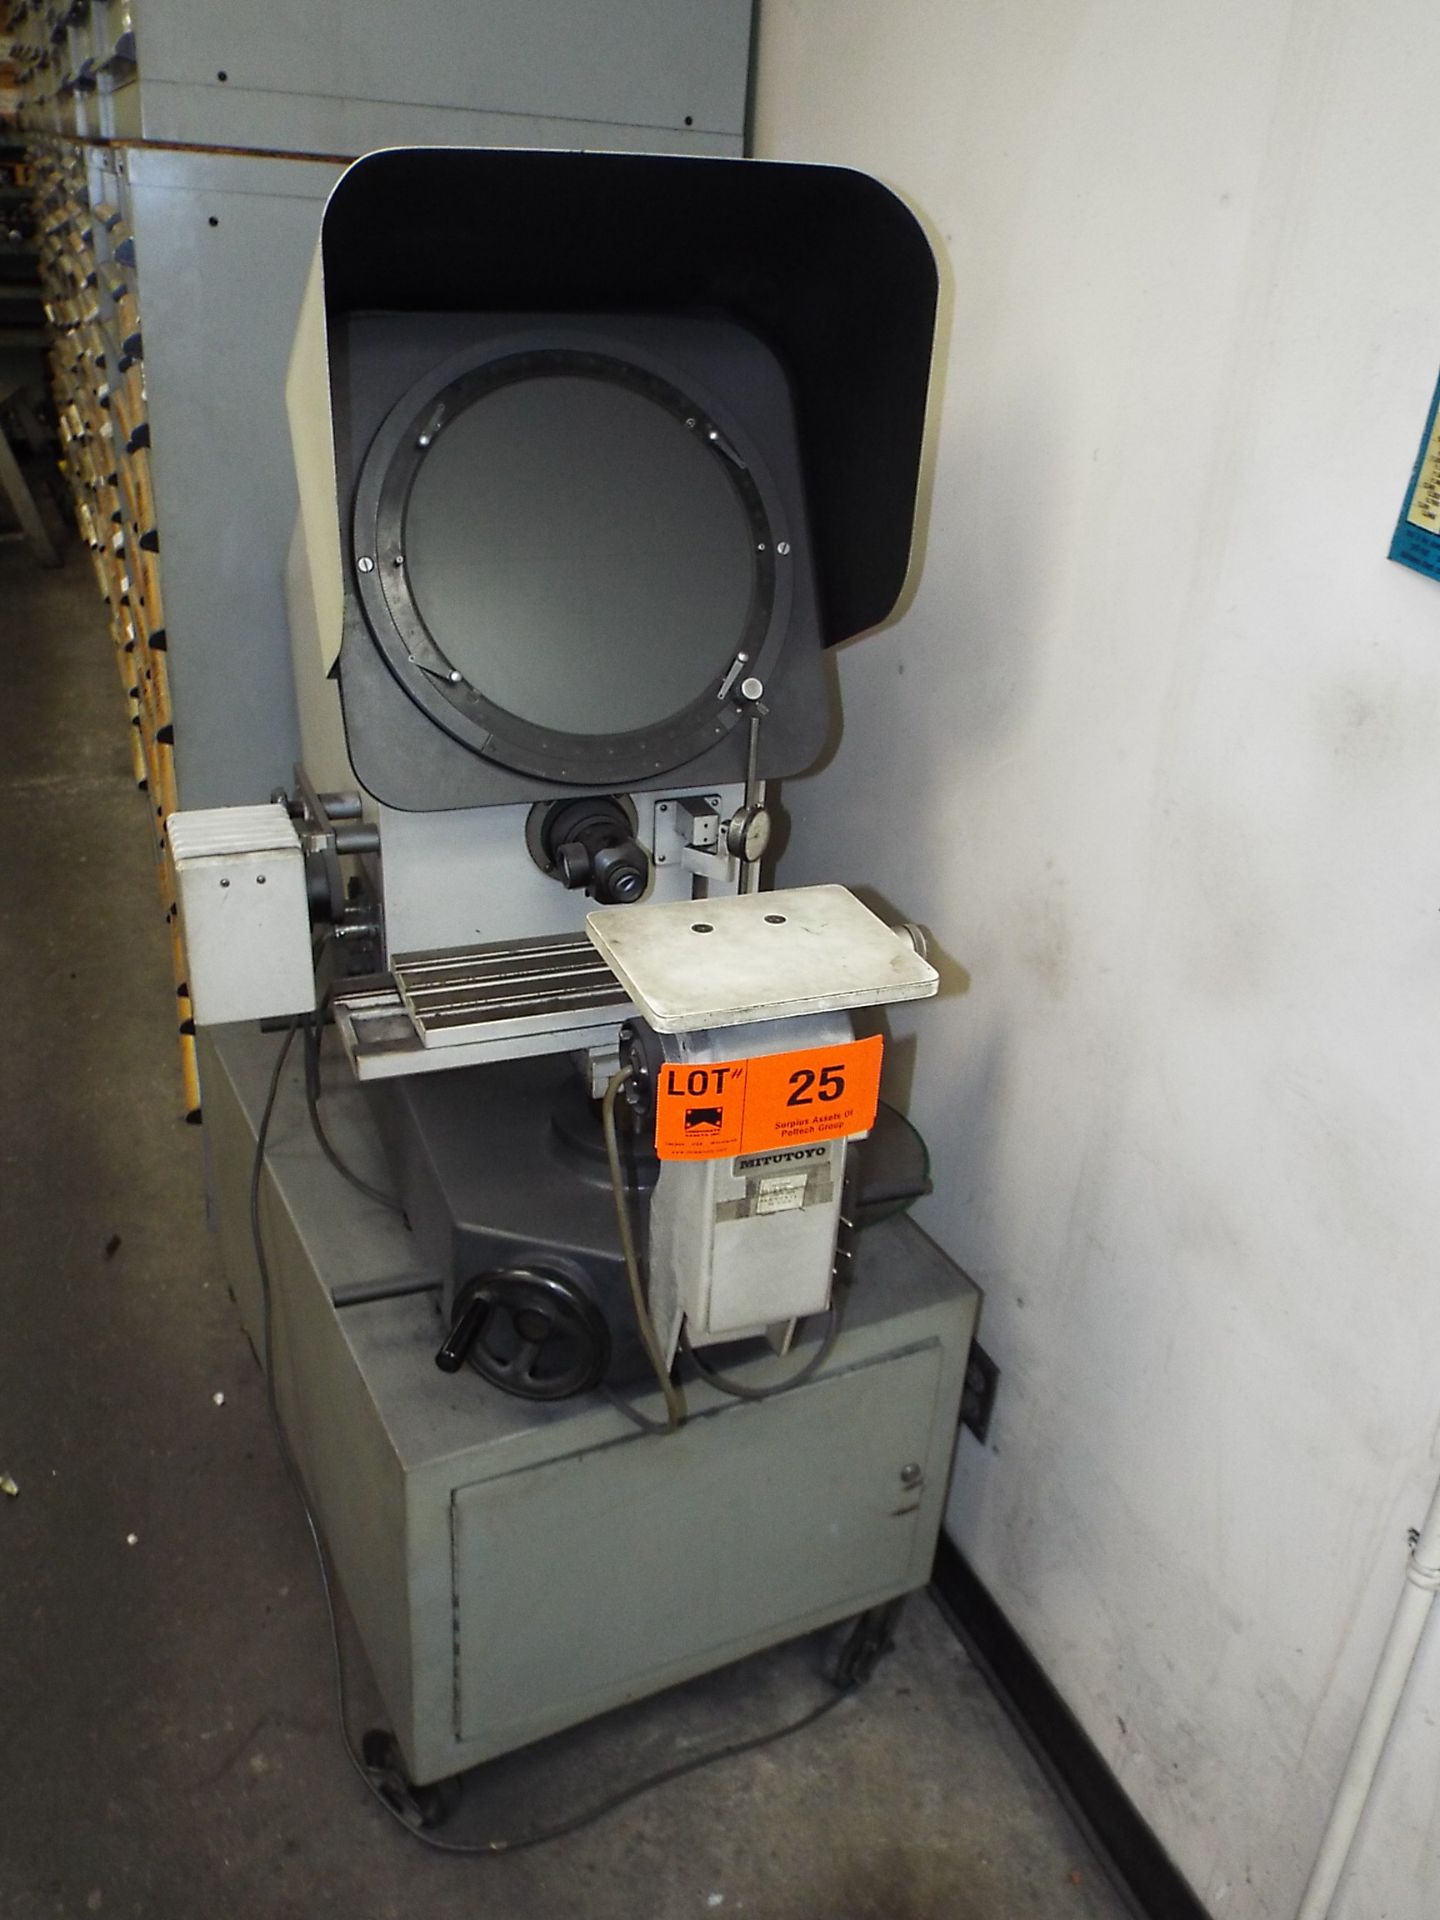 MITUTOYO HP 350 PROFILE PROJECTOR OPTICAL COMPARATOR, S/N: 144 (LOCATED AT 460 SIGNET DR, NORTH